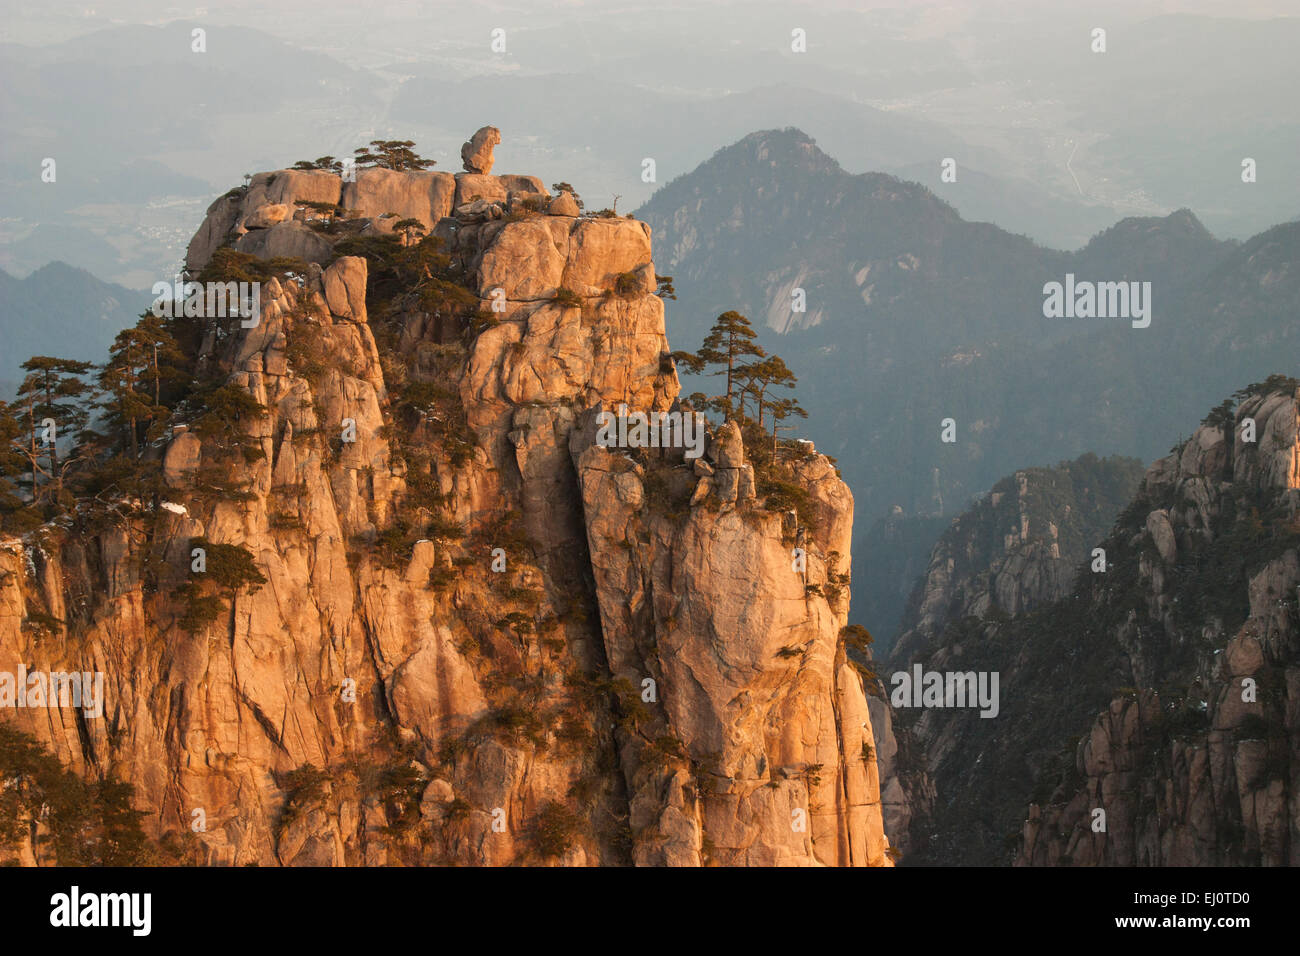 The Monkey Rock, Huangshan,(the Yellow Mountain) National Park, China Stock Photo